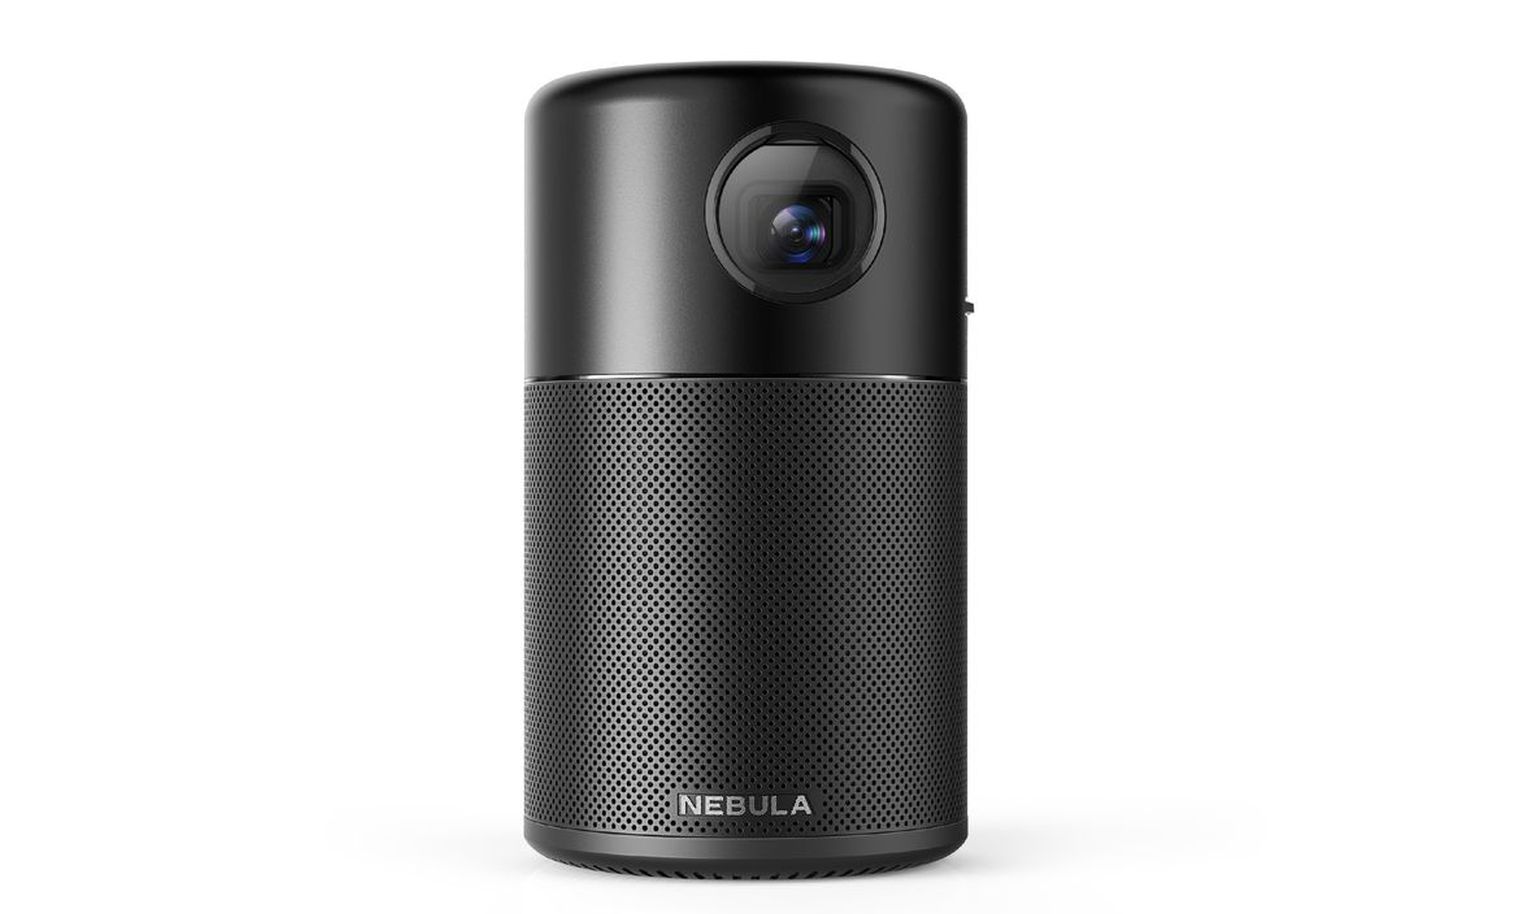 The Anker Nebula Capsule is a cool and tiny Android projector and